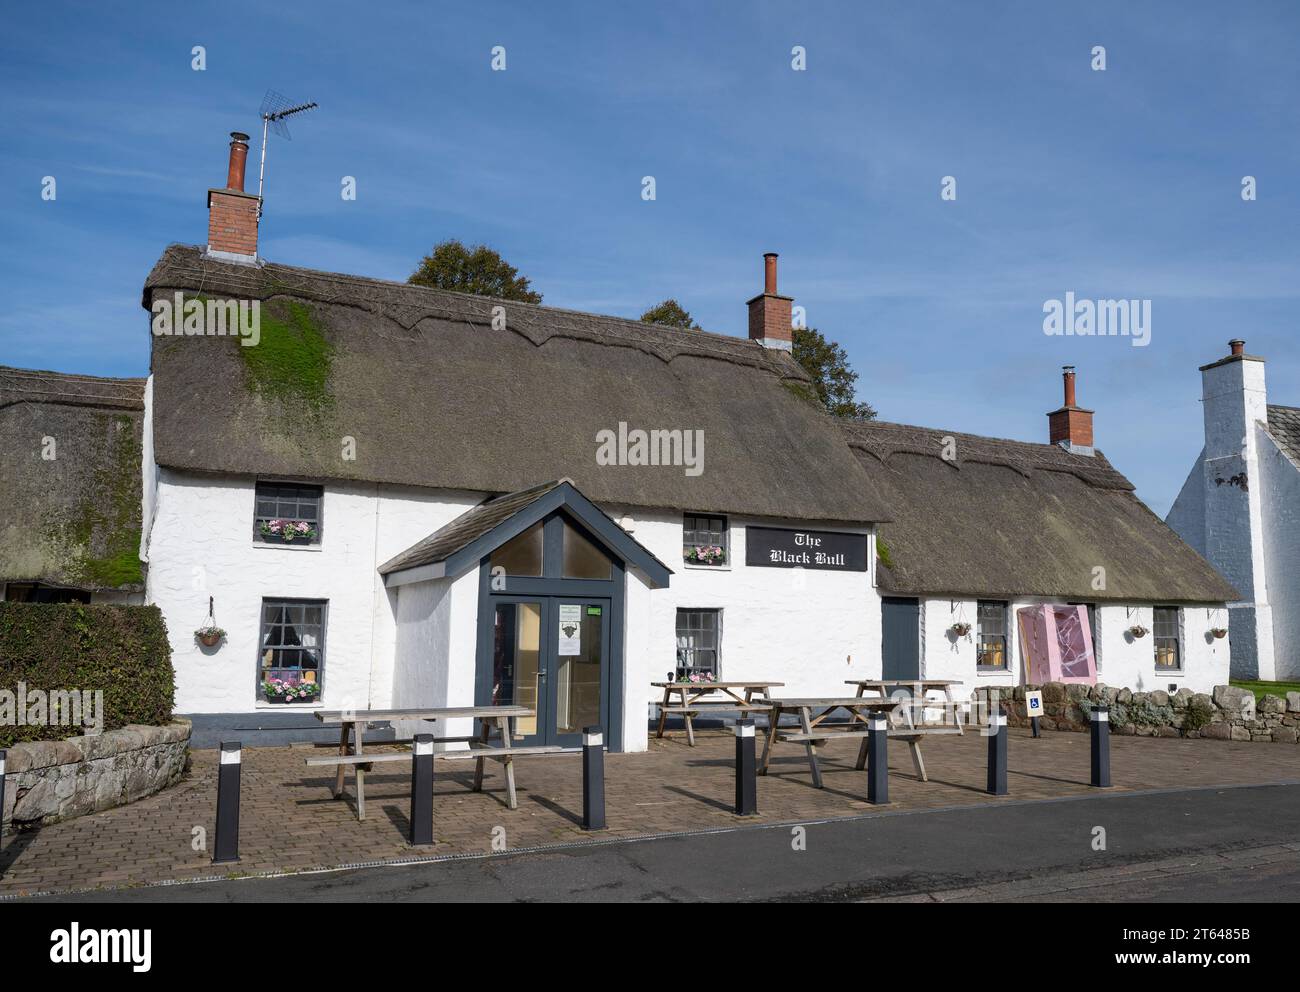 The Black Bull public house, Etal, Cornhill-on-Tweed, Northumberland, England, UK - only thatched pub in Northumberland. Stock Photo